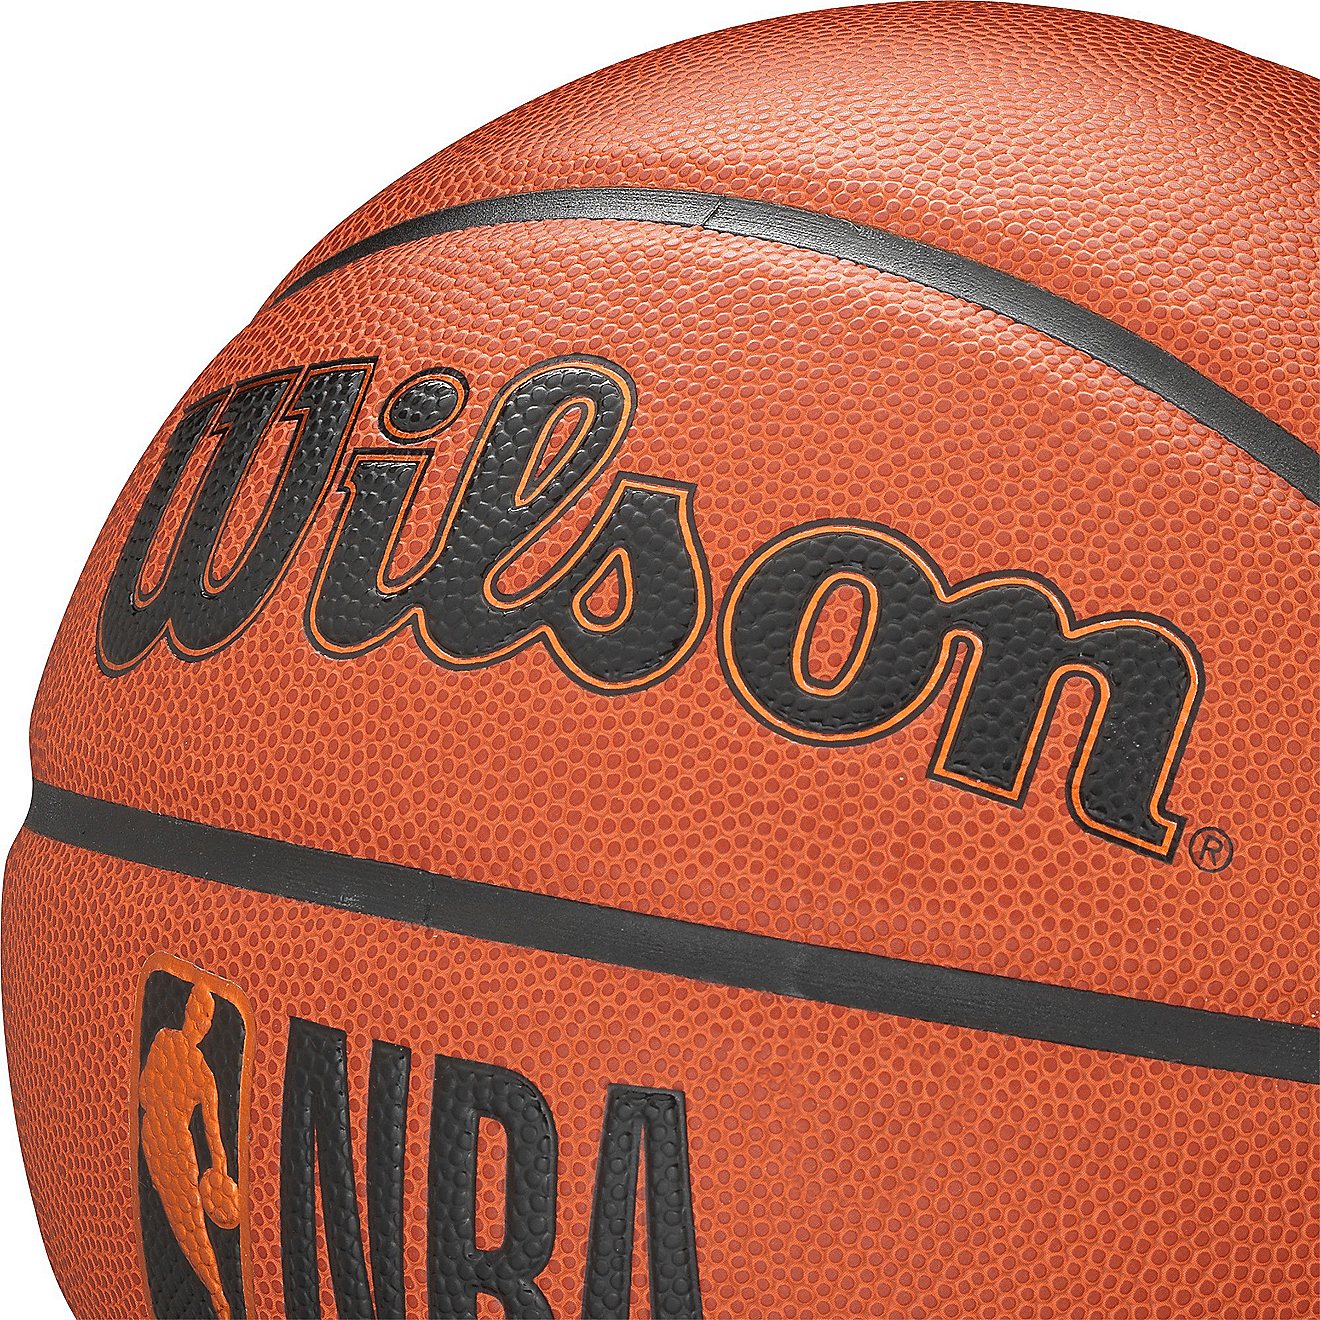 Wilson NBA Forge Series Indoor/Outdoor Basketball                                                                                - view number 8